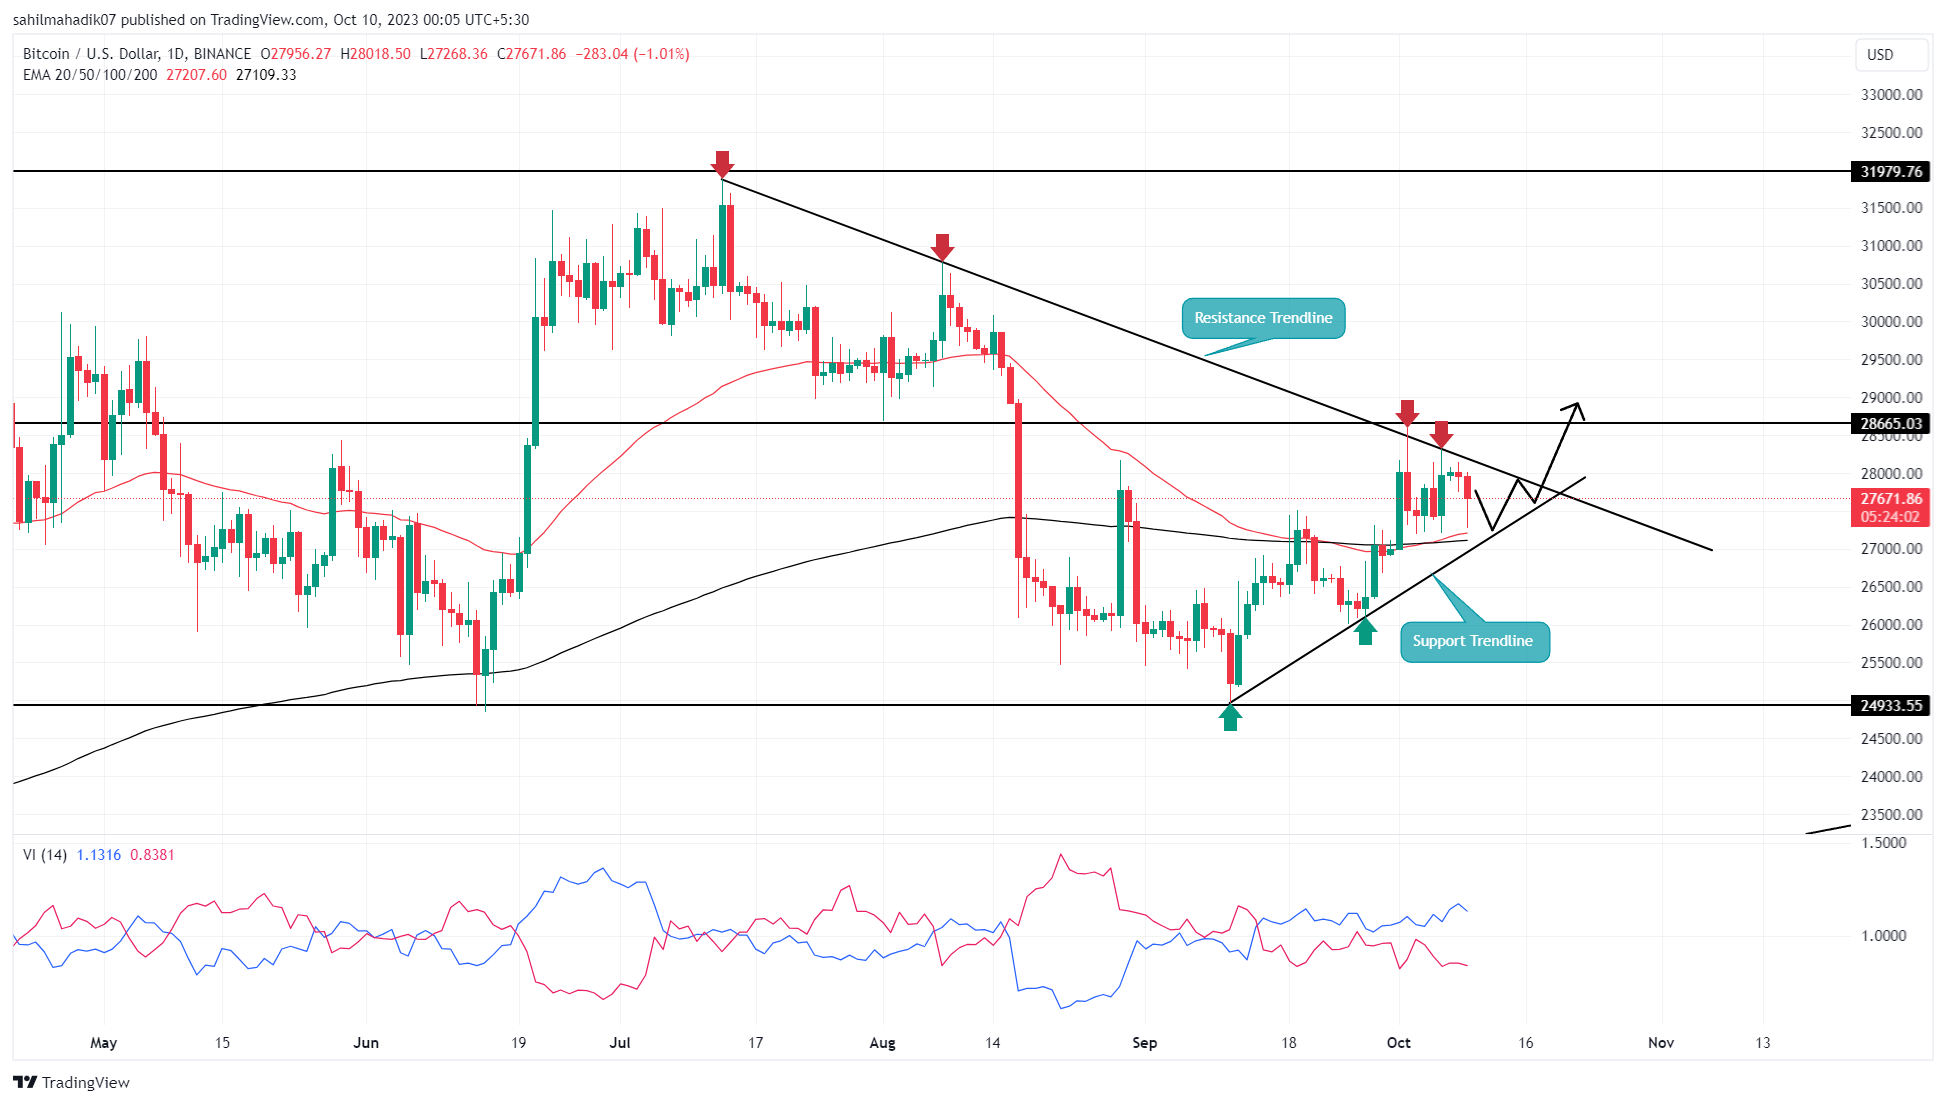 Bitcoin (BTC) Correction Could Be Approaching